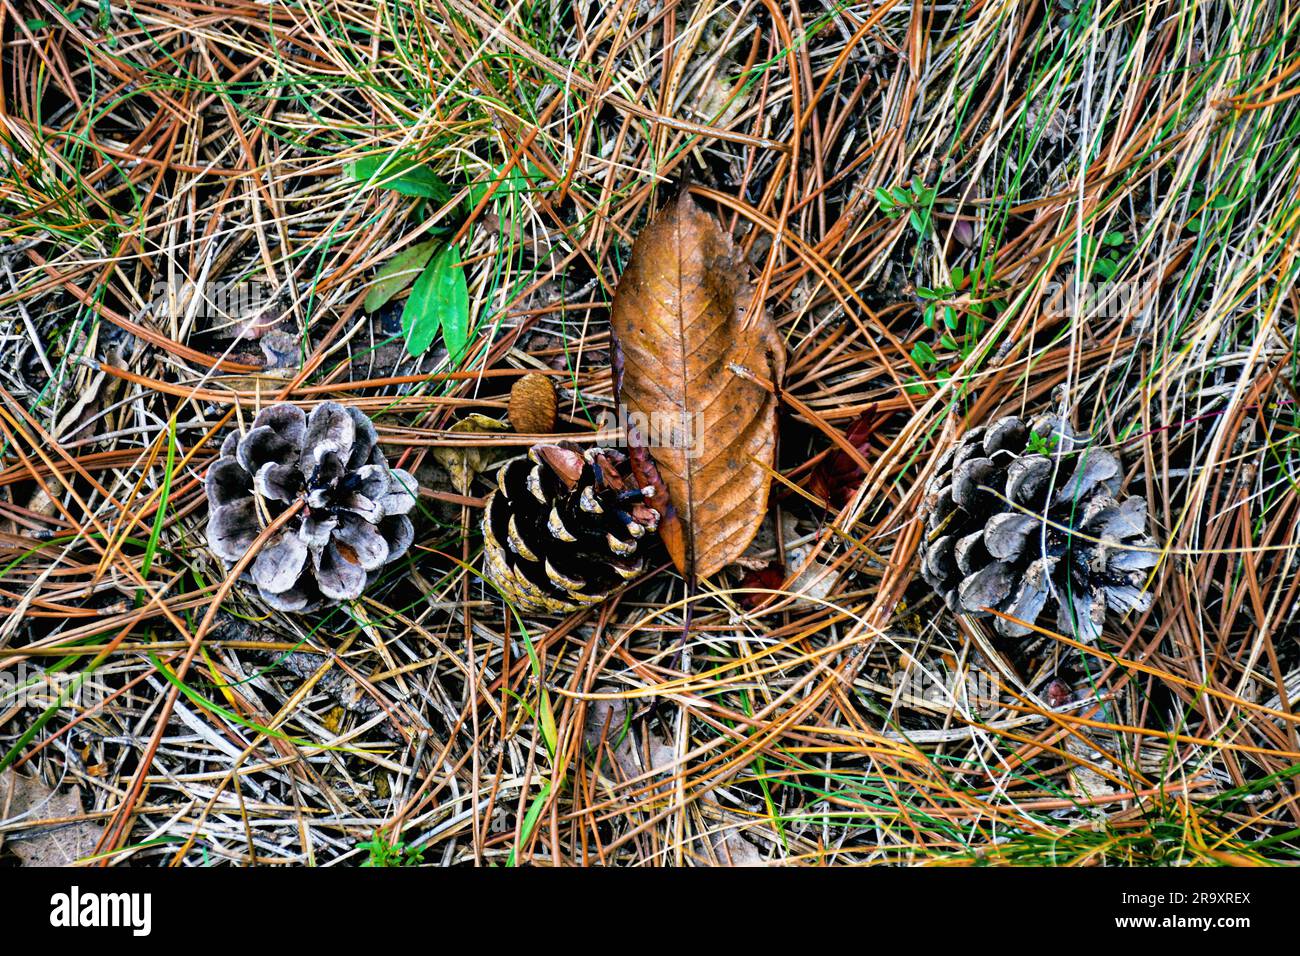 Fallen pine cones on stony ground covered with conifer needles Stock Photo